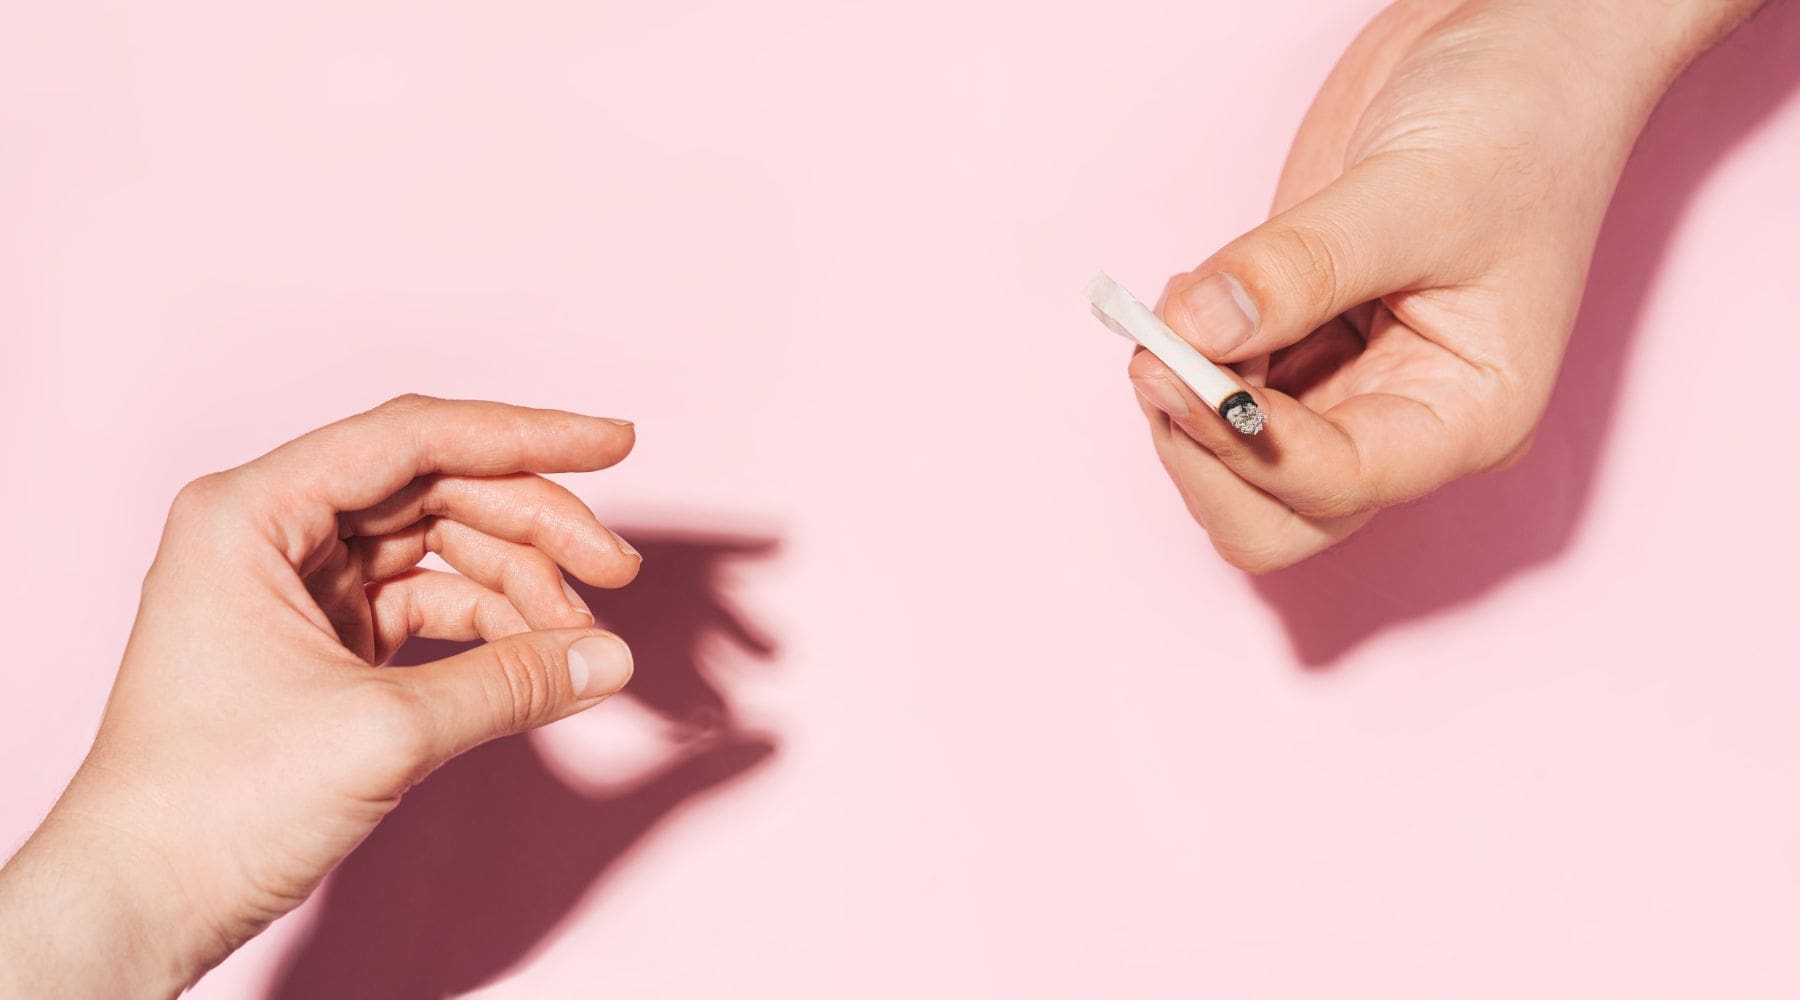 Two hands passing a smoldering cannabis joint to one another on a baby pink background